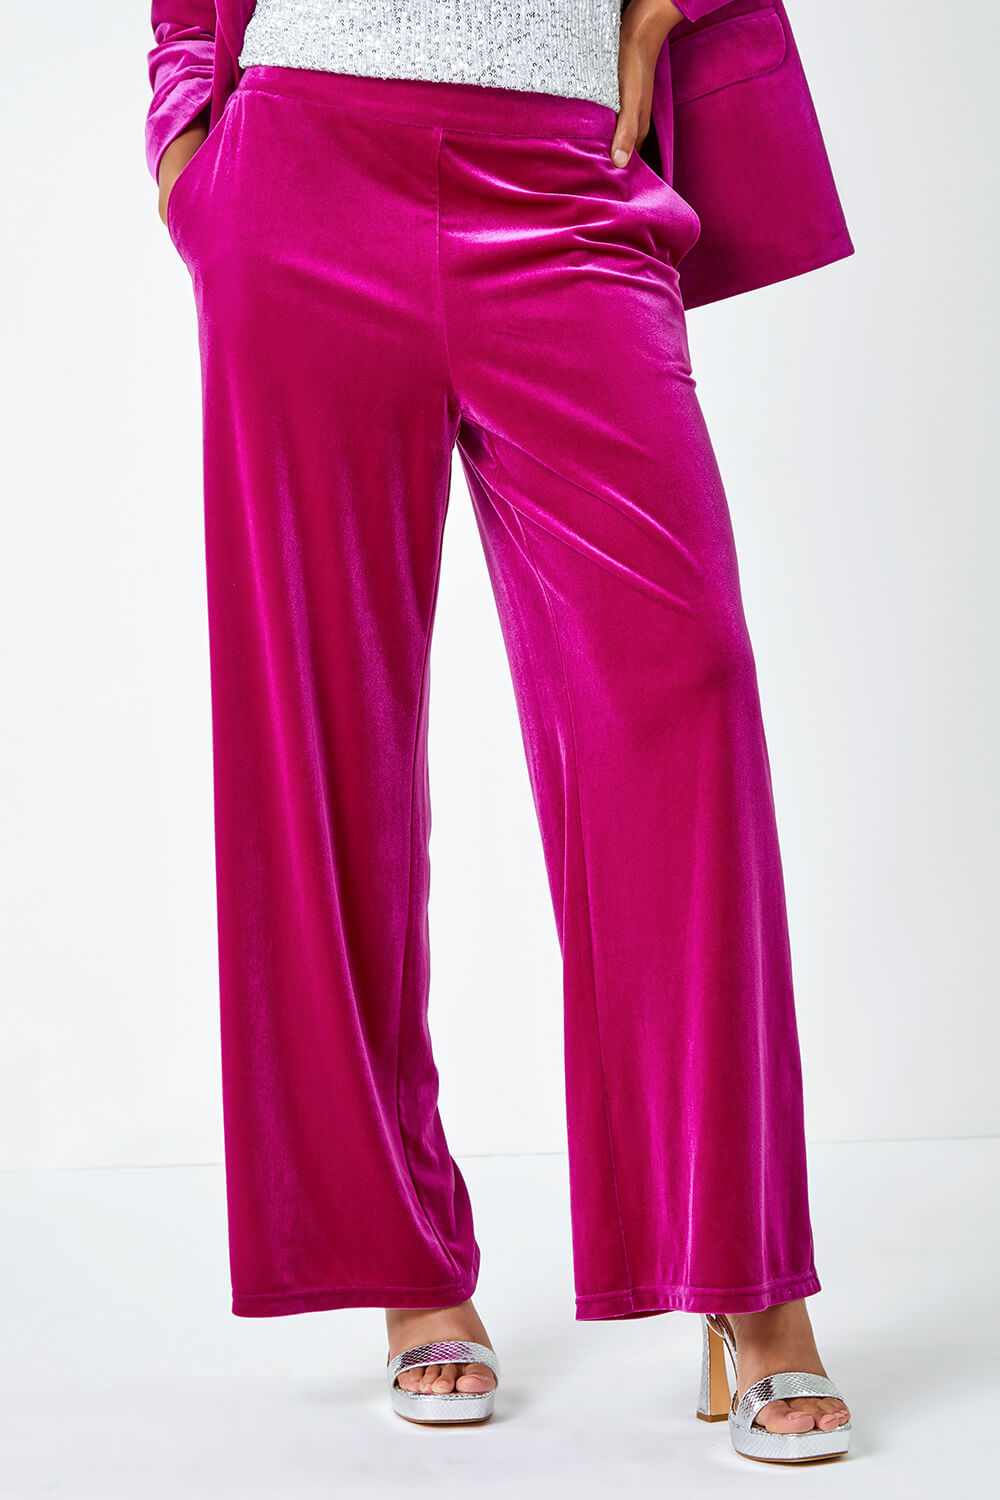 PINK Wide Leg Velvet Stretch Trousers, Image 4 of 6